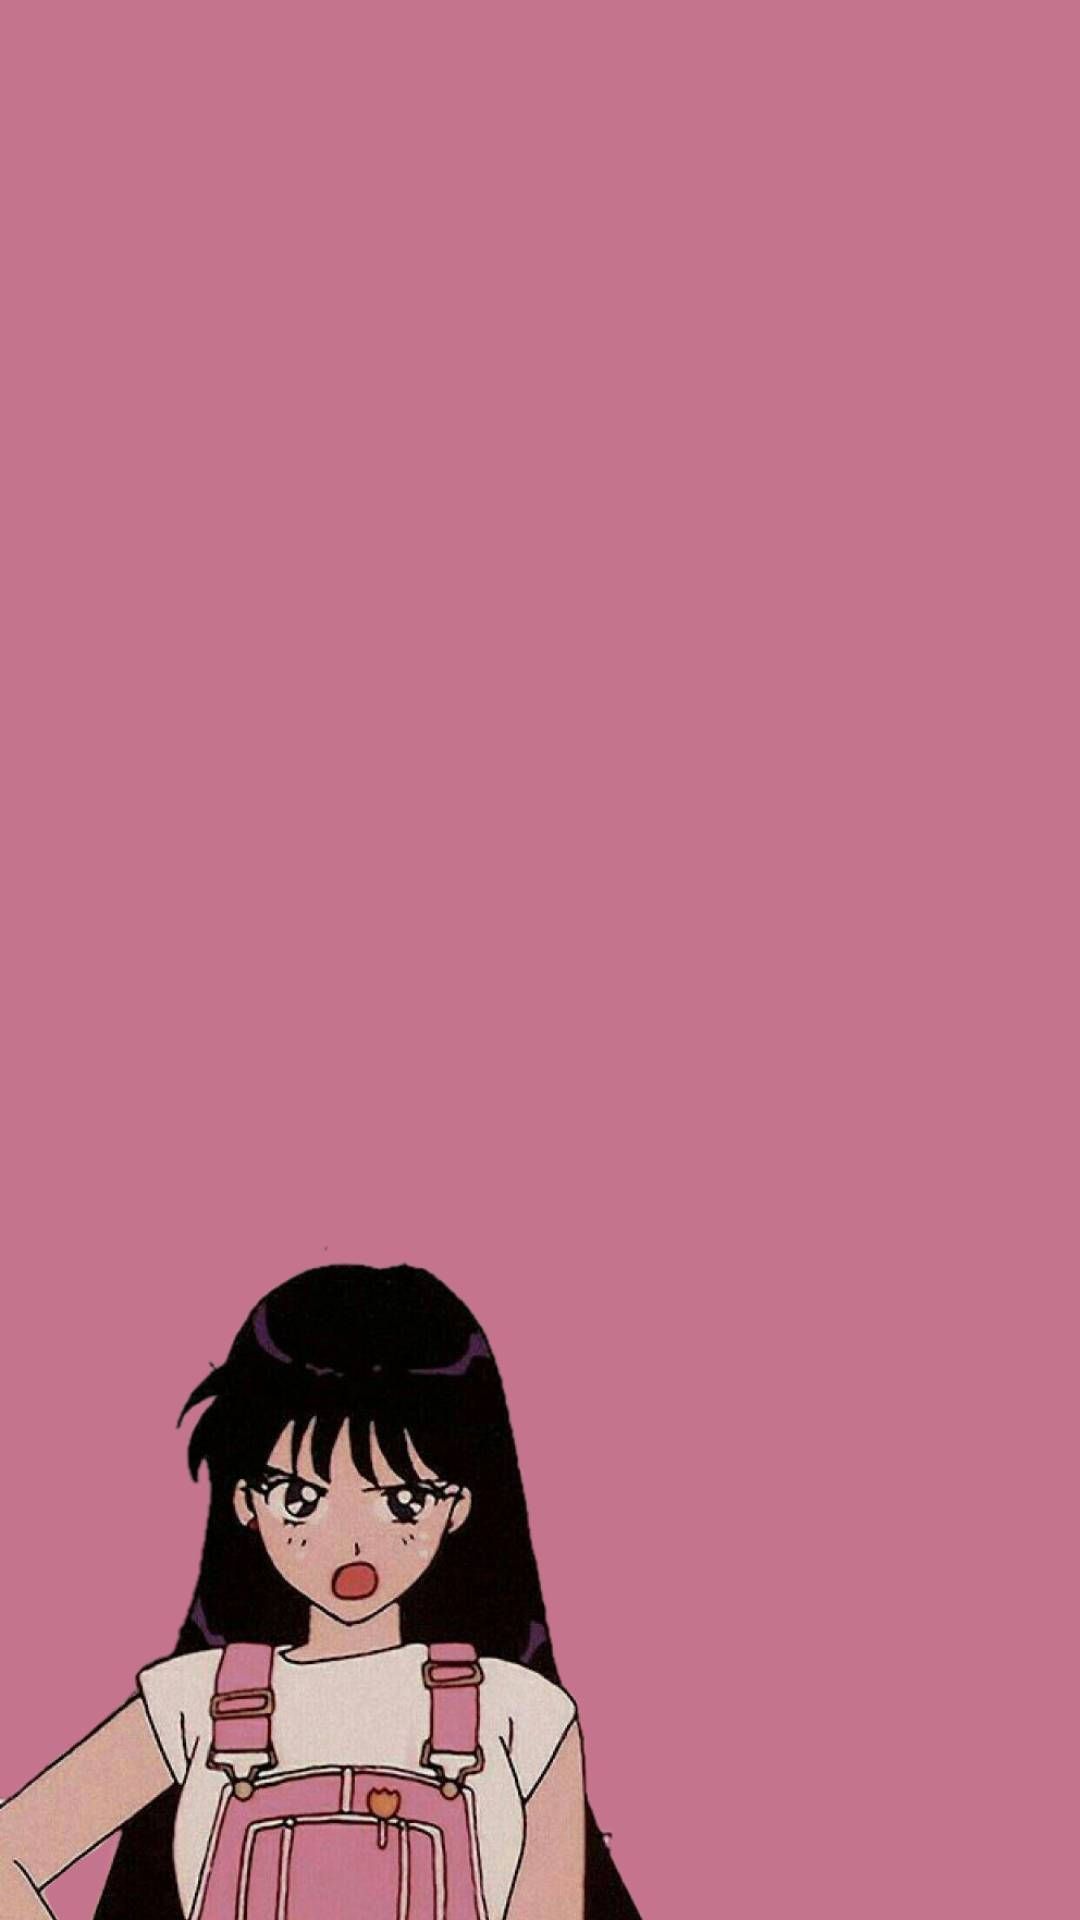 Download Sailor Mars Aesthetic Pink Anime Background Wallpaper